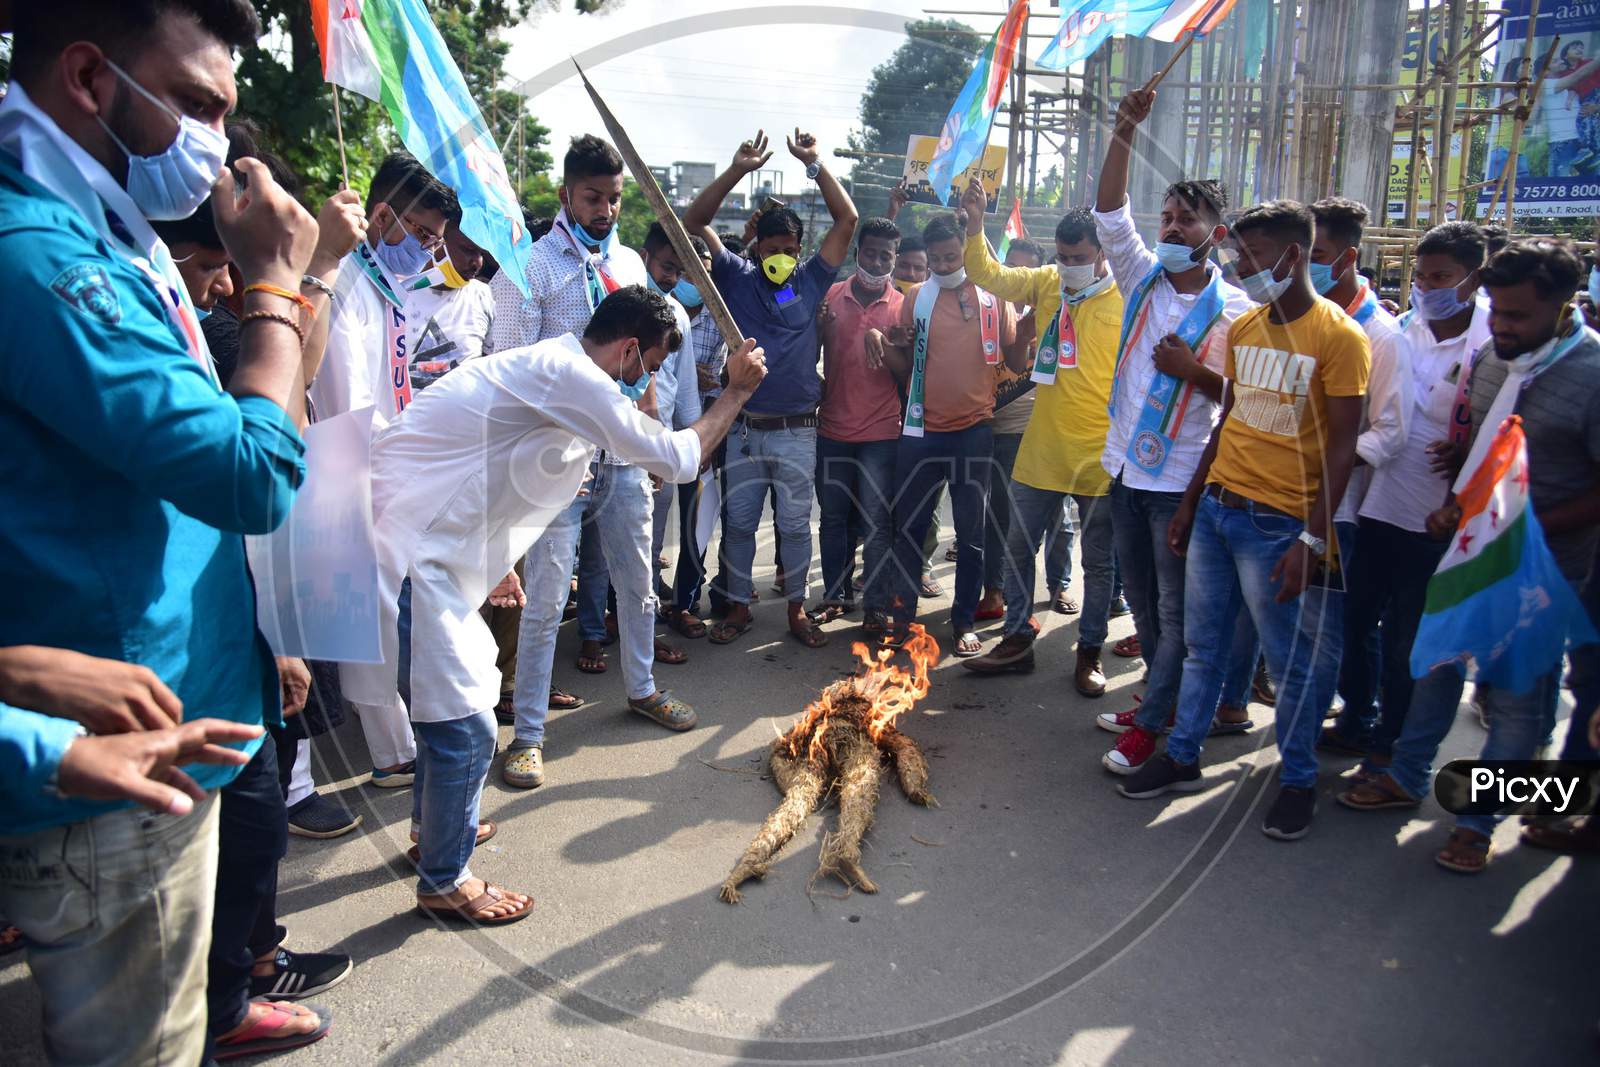 Activists of NSUI  burn effigy of Assam chief minister Sarbananda sonowal during a protest against the alleged recruitment scam of Assam Police, demanding the arrest of BJP leaders and prime accused Diban Deka in Nagaon District of Assam on Seot 30,2020